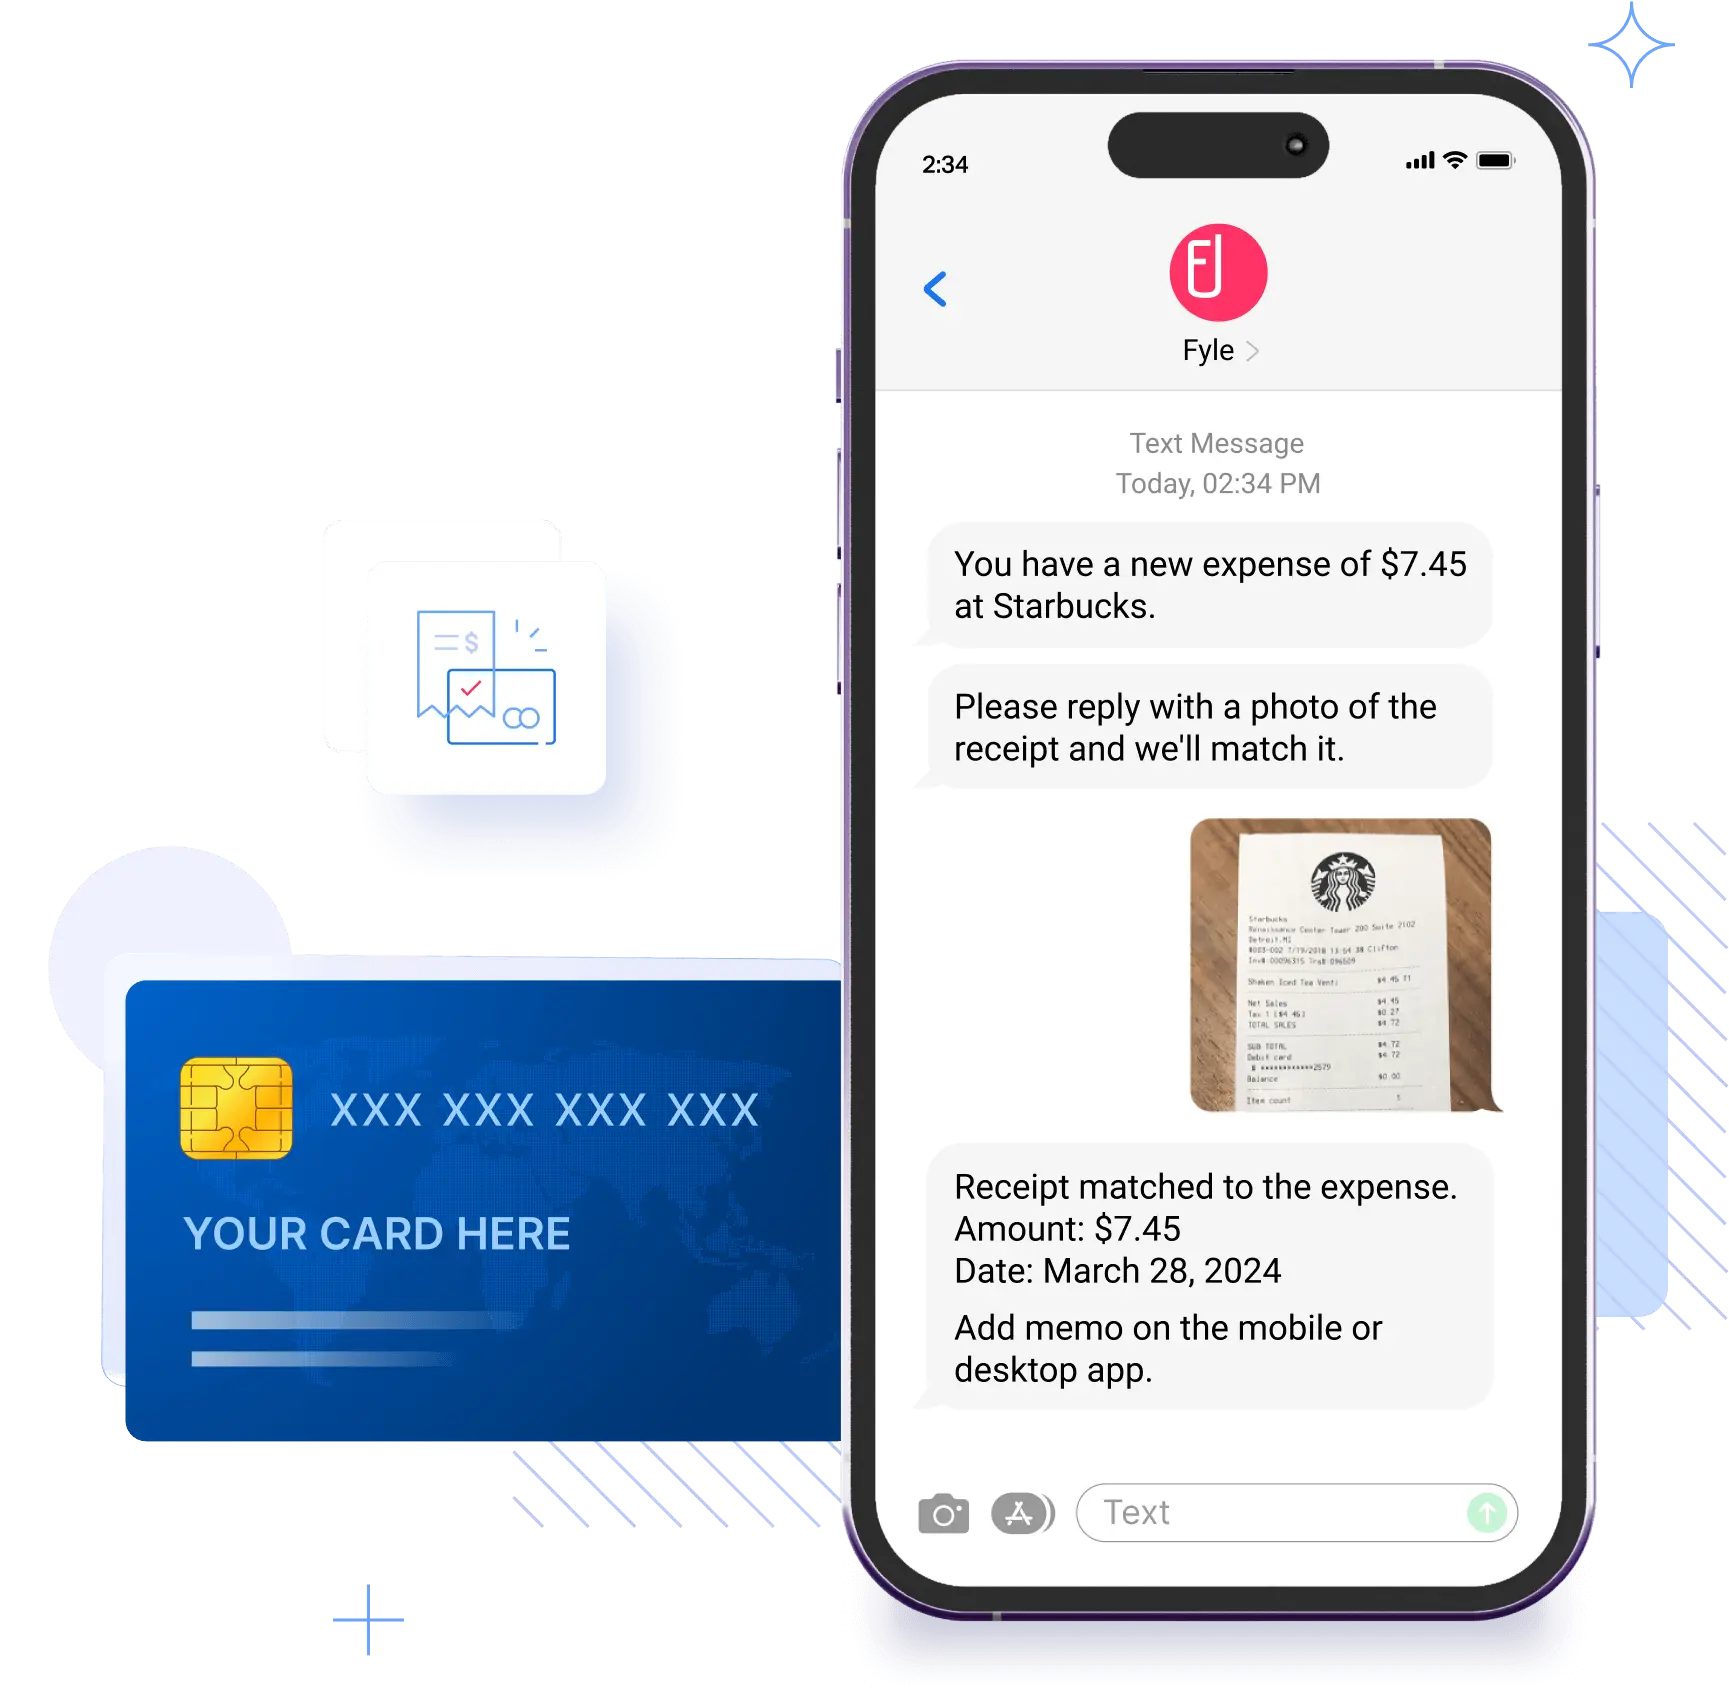 Real-time expense management on cards you already have